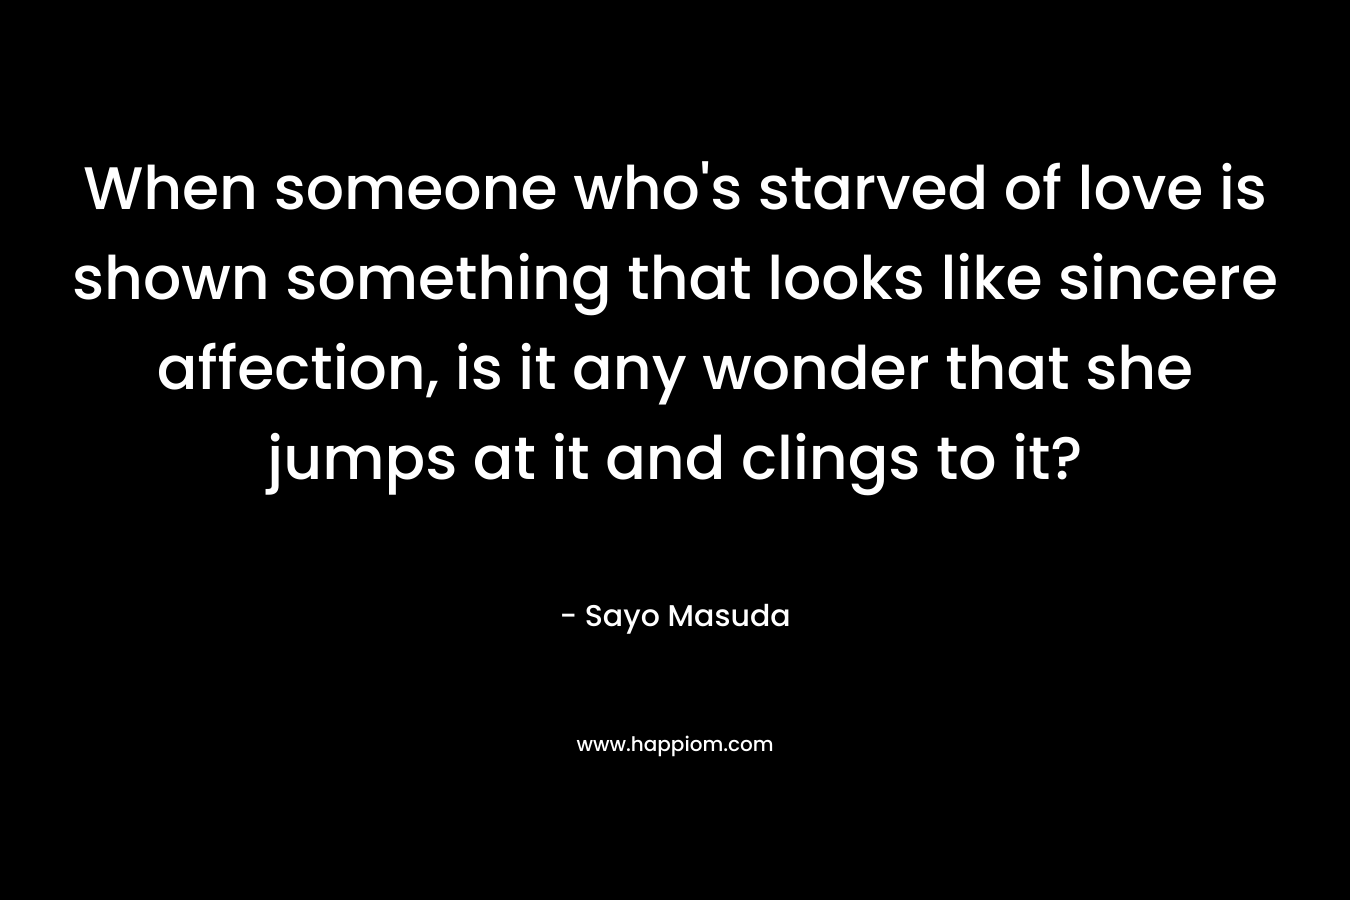 When someone who’s starved of love is shown something that looks like sincere affection, is it any wonder that she jumps at it and clings to it? – Sayo Masuda